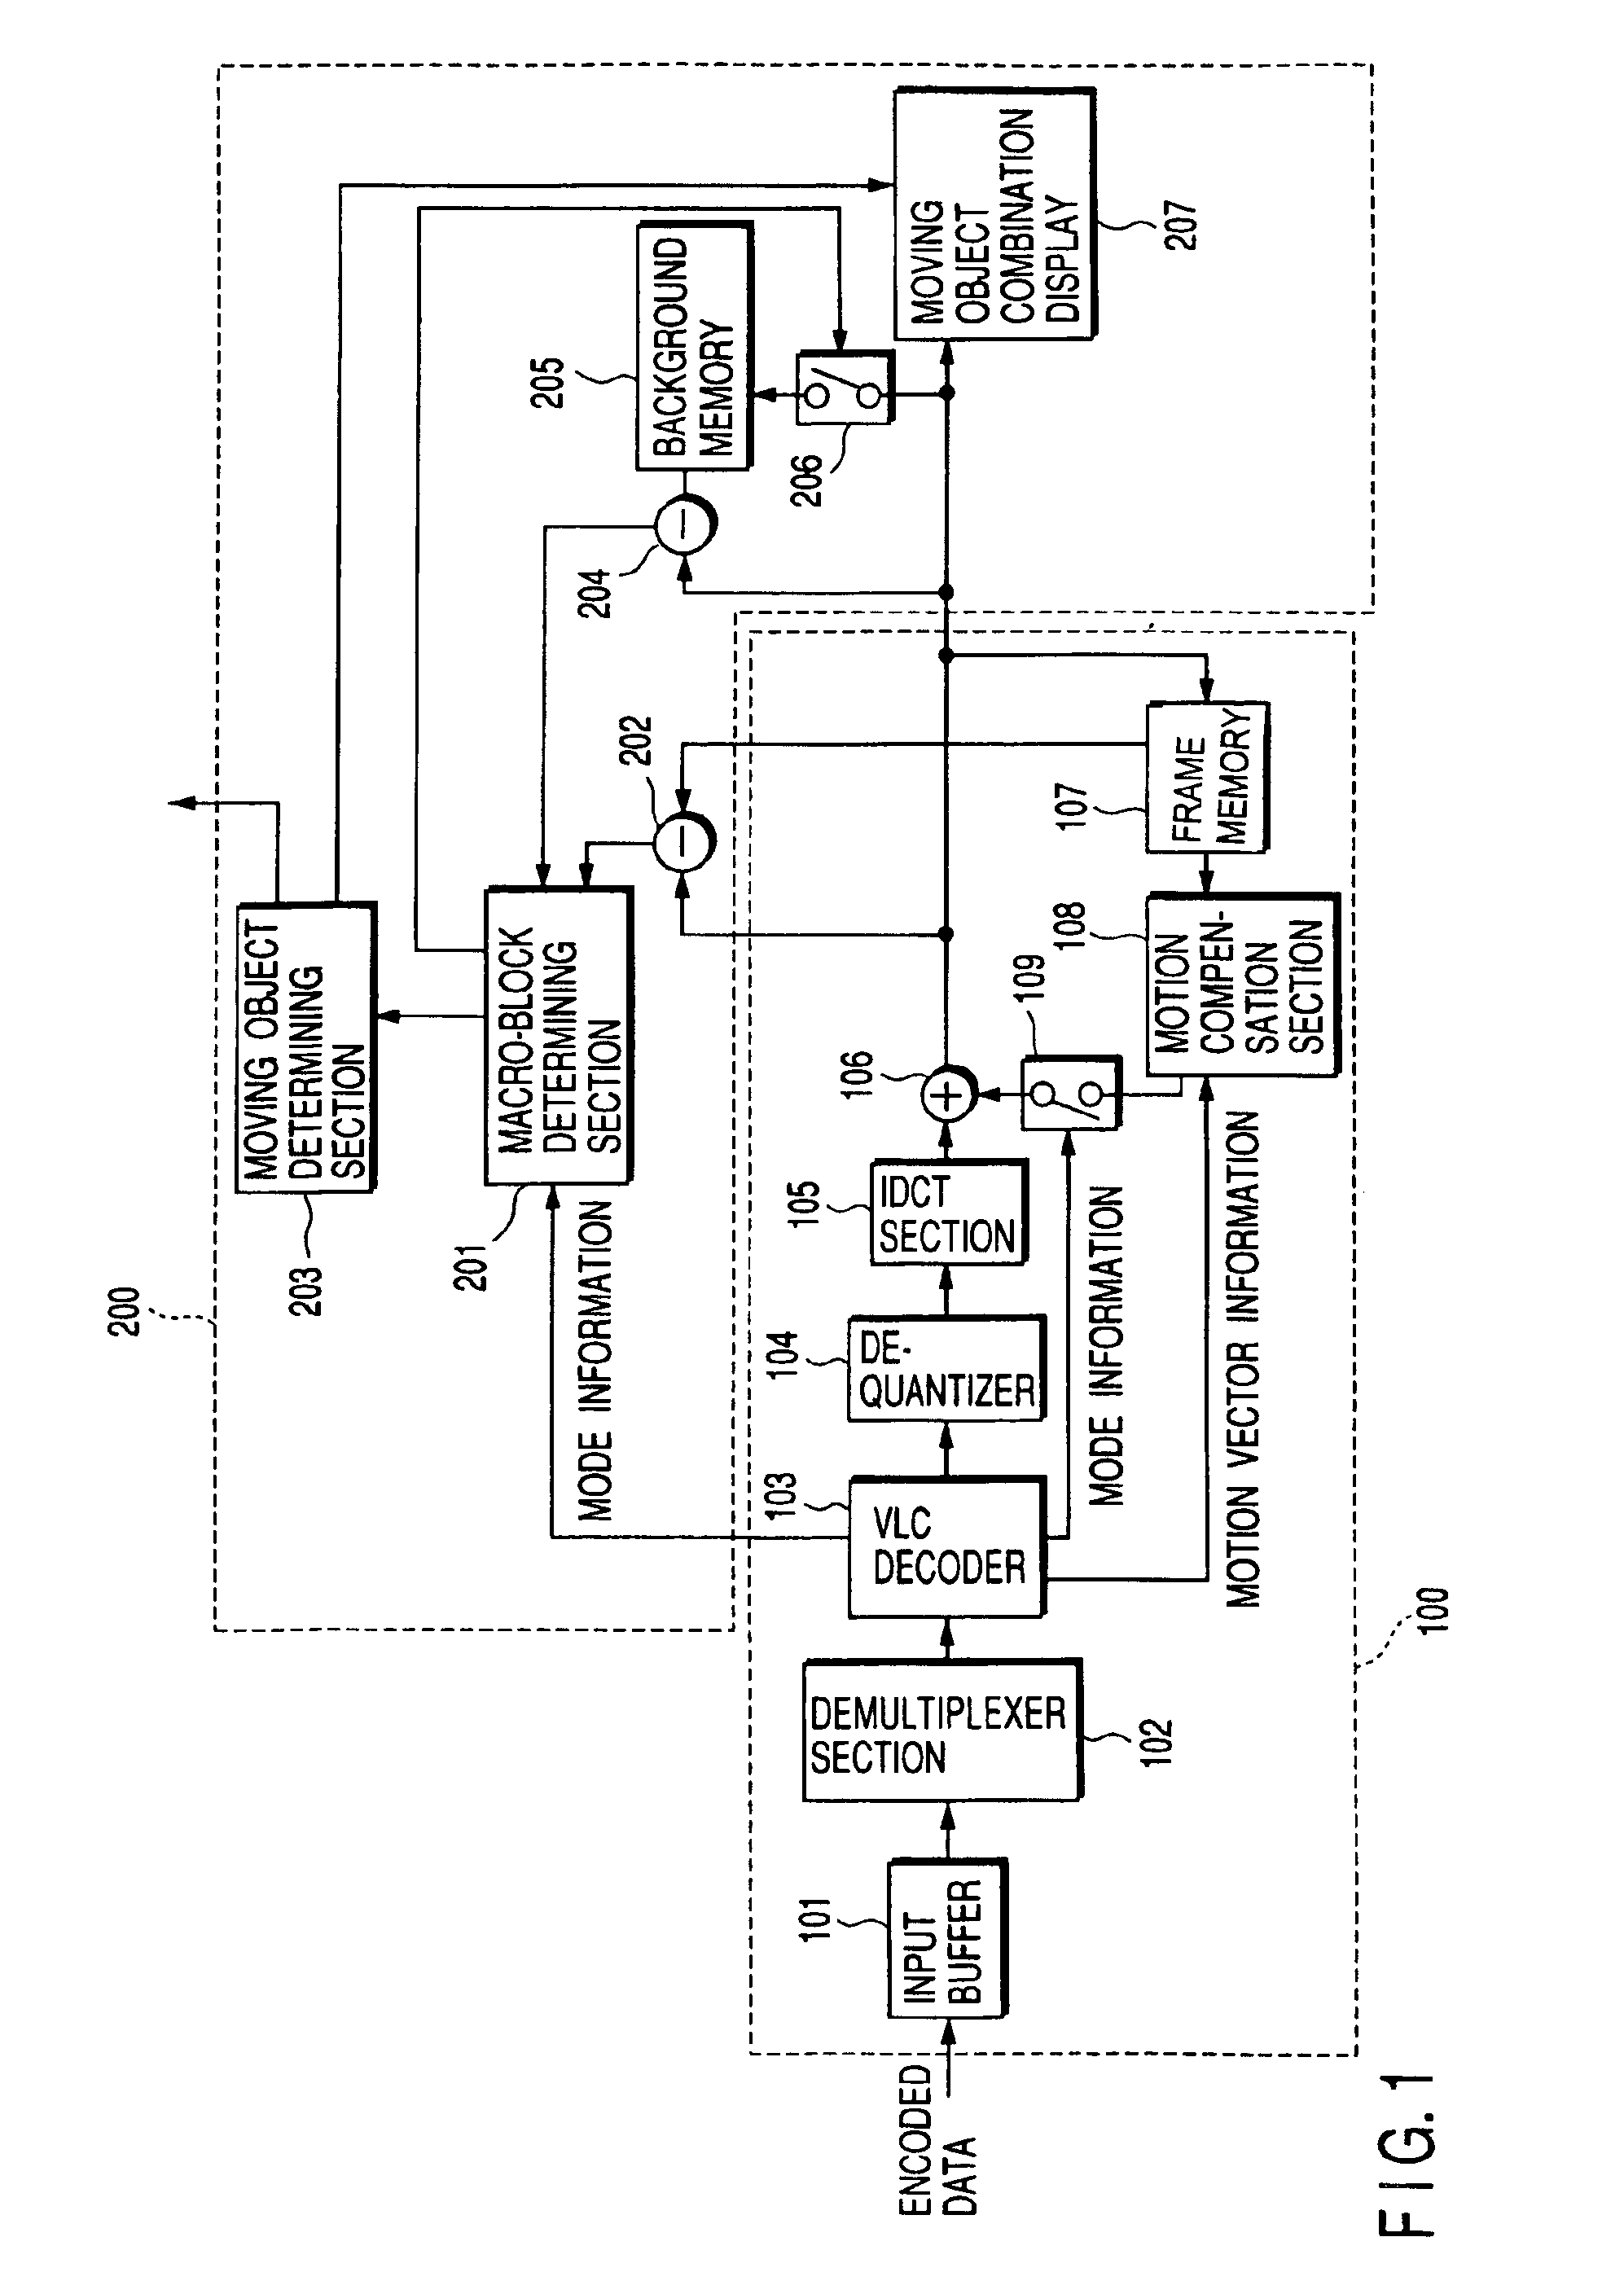 Method for detecting a moving object in motion video and apparatus therefor